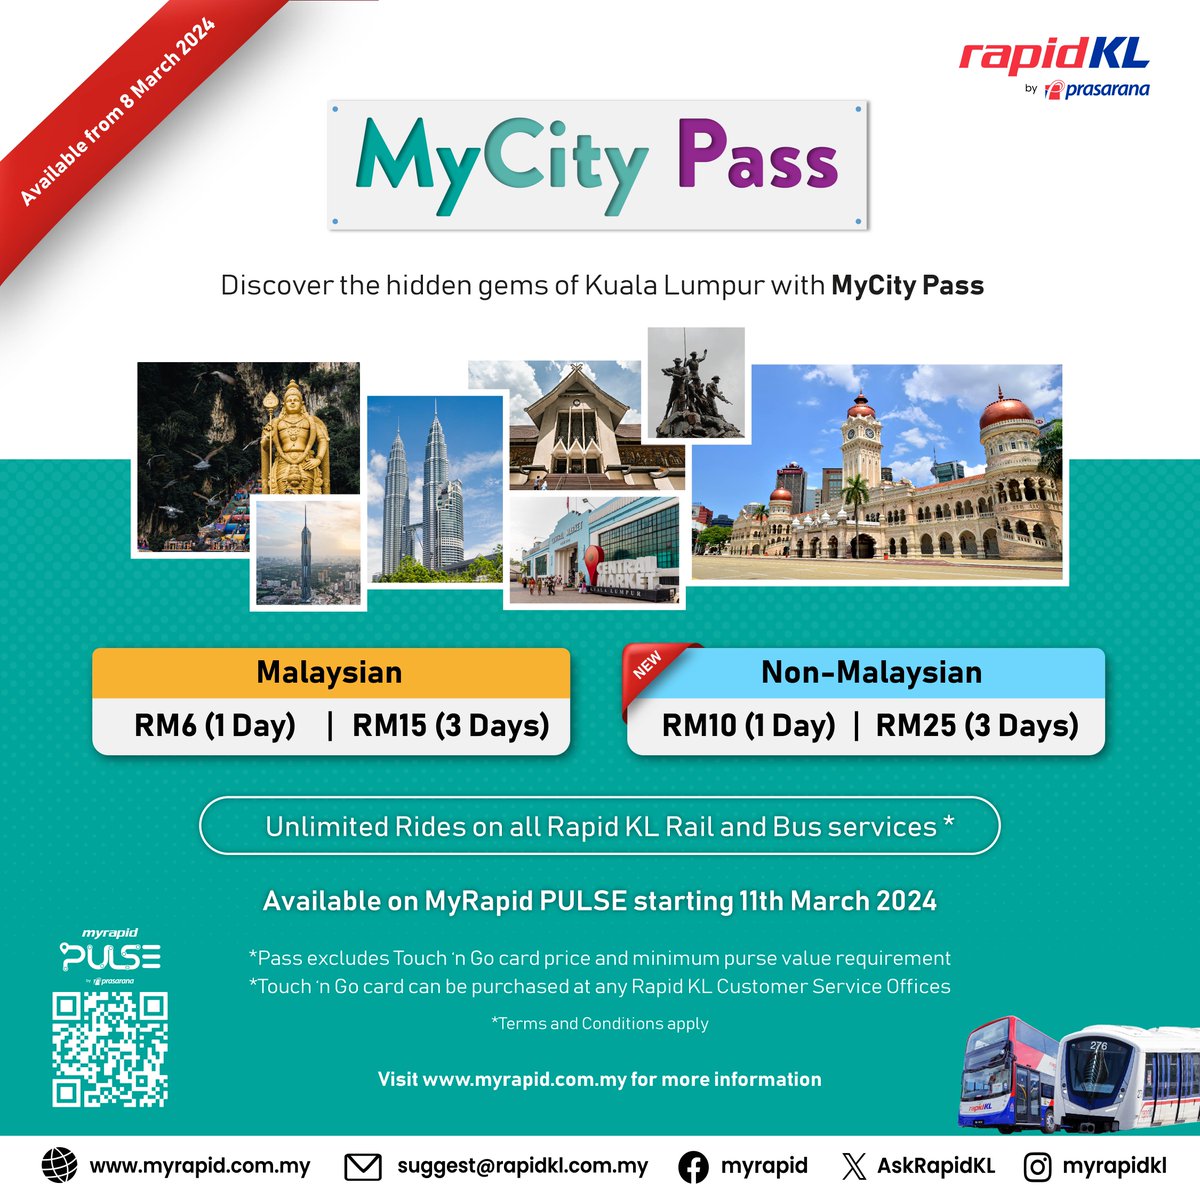 Unlimited Rides, Now for Everyone! Experience Kuala Lumpur/Putrajaya hassle-free with MyCity Pass! Now available for EVERYONE - locals and visitors alike! Get yours now and start exploring! #MyCityPass #UnlimitedRides #RapidKL